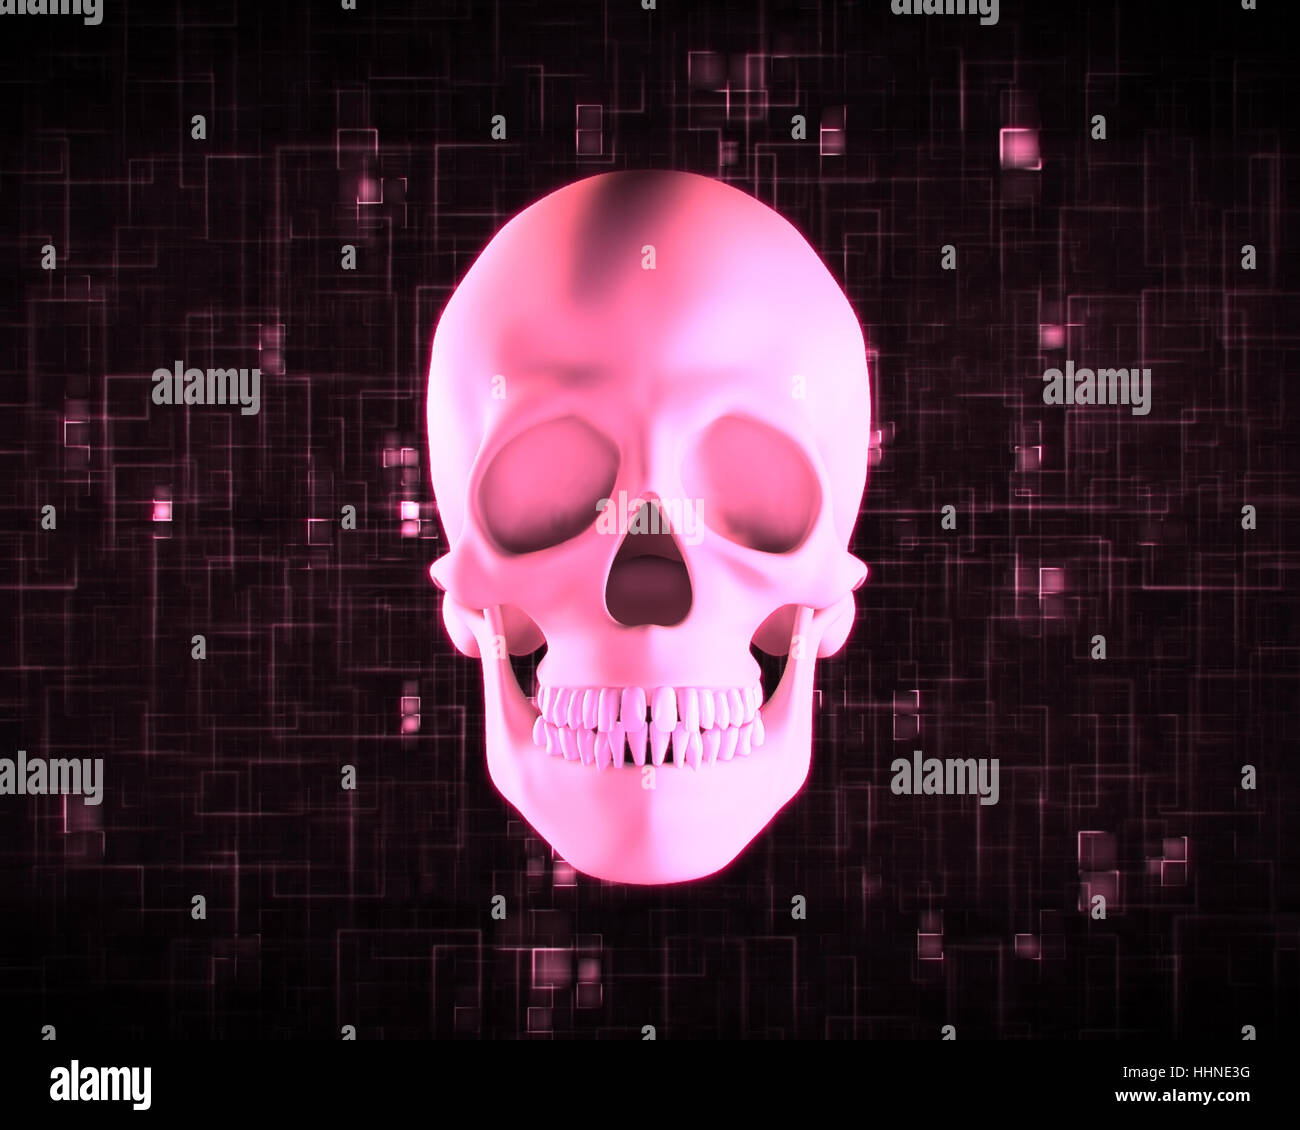 Pink Human Skull On Digital Black And Pink Background Stock